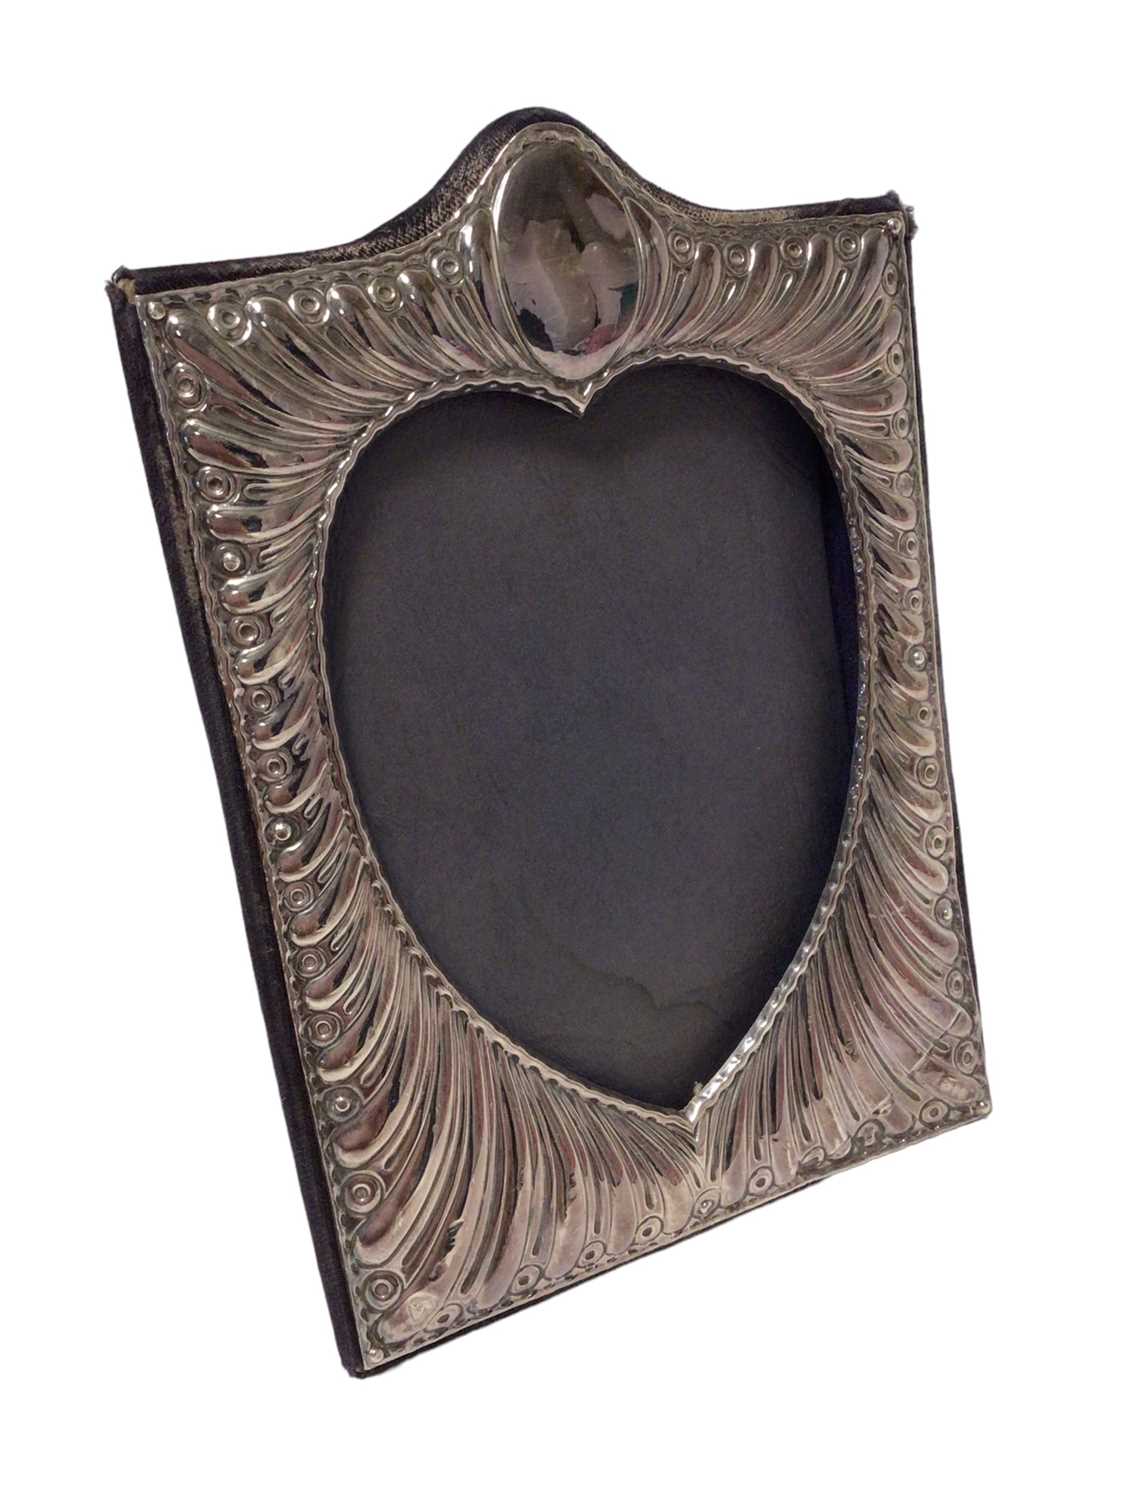 Contemporary silver photograph frame, with embossed decoration and a pair of candlesticks - Image 2 of 5